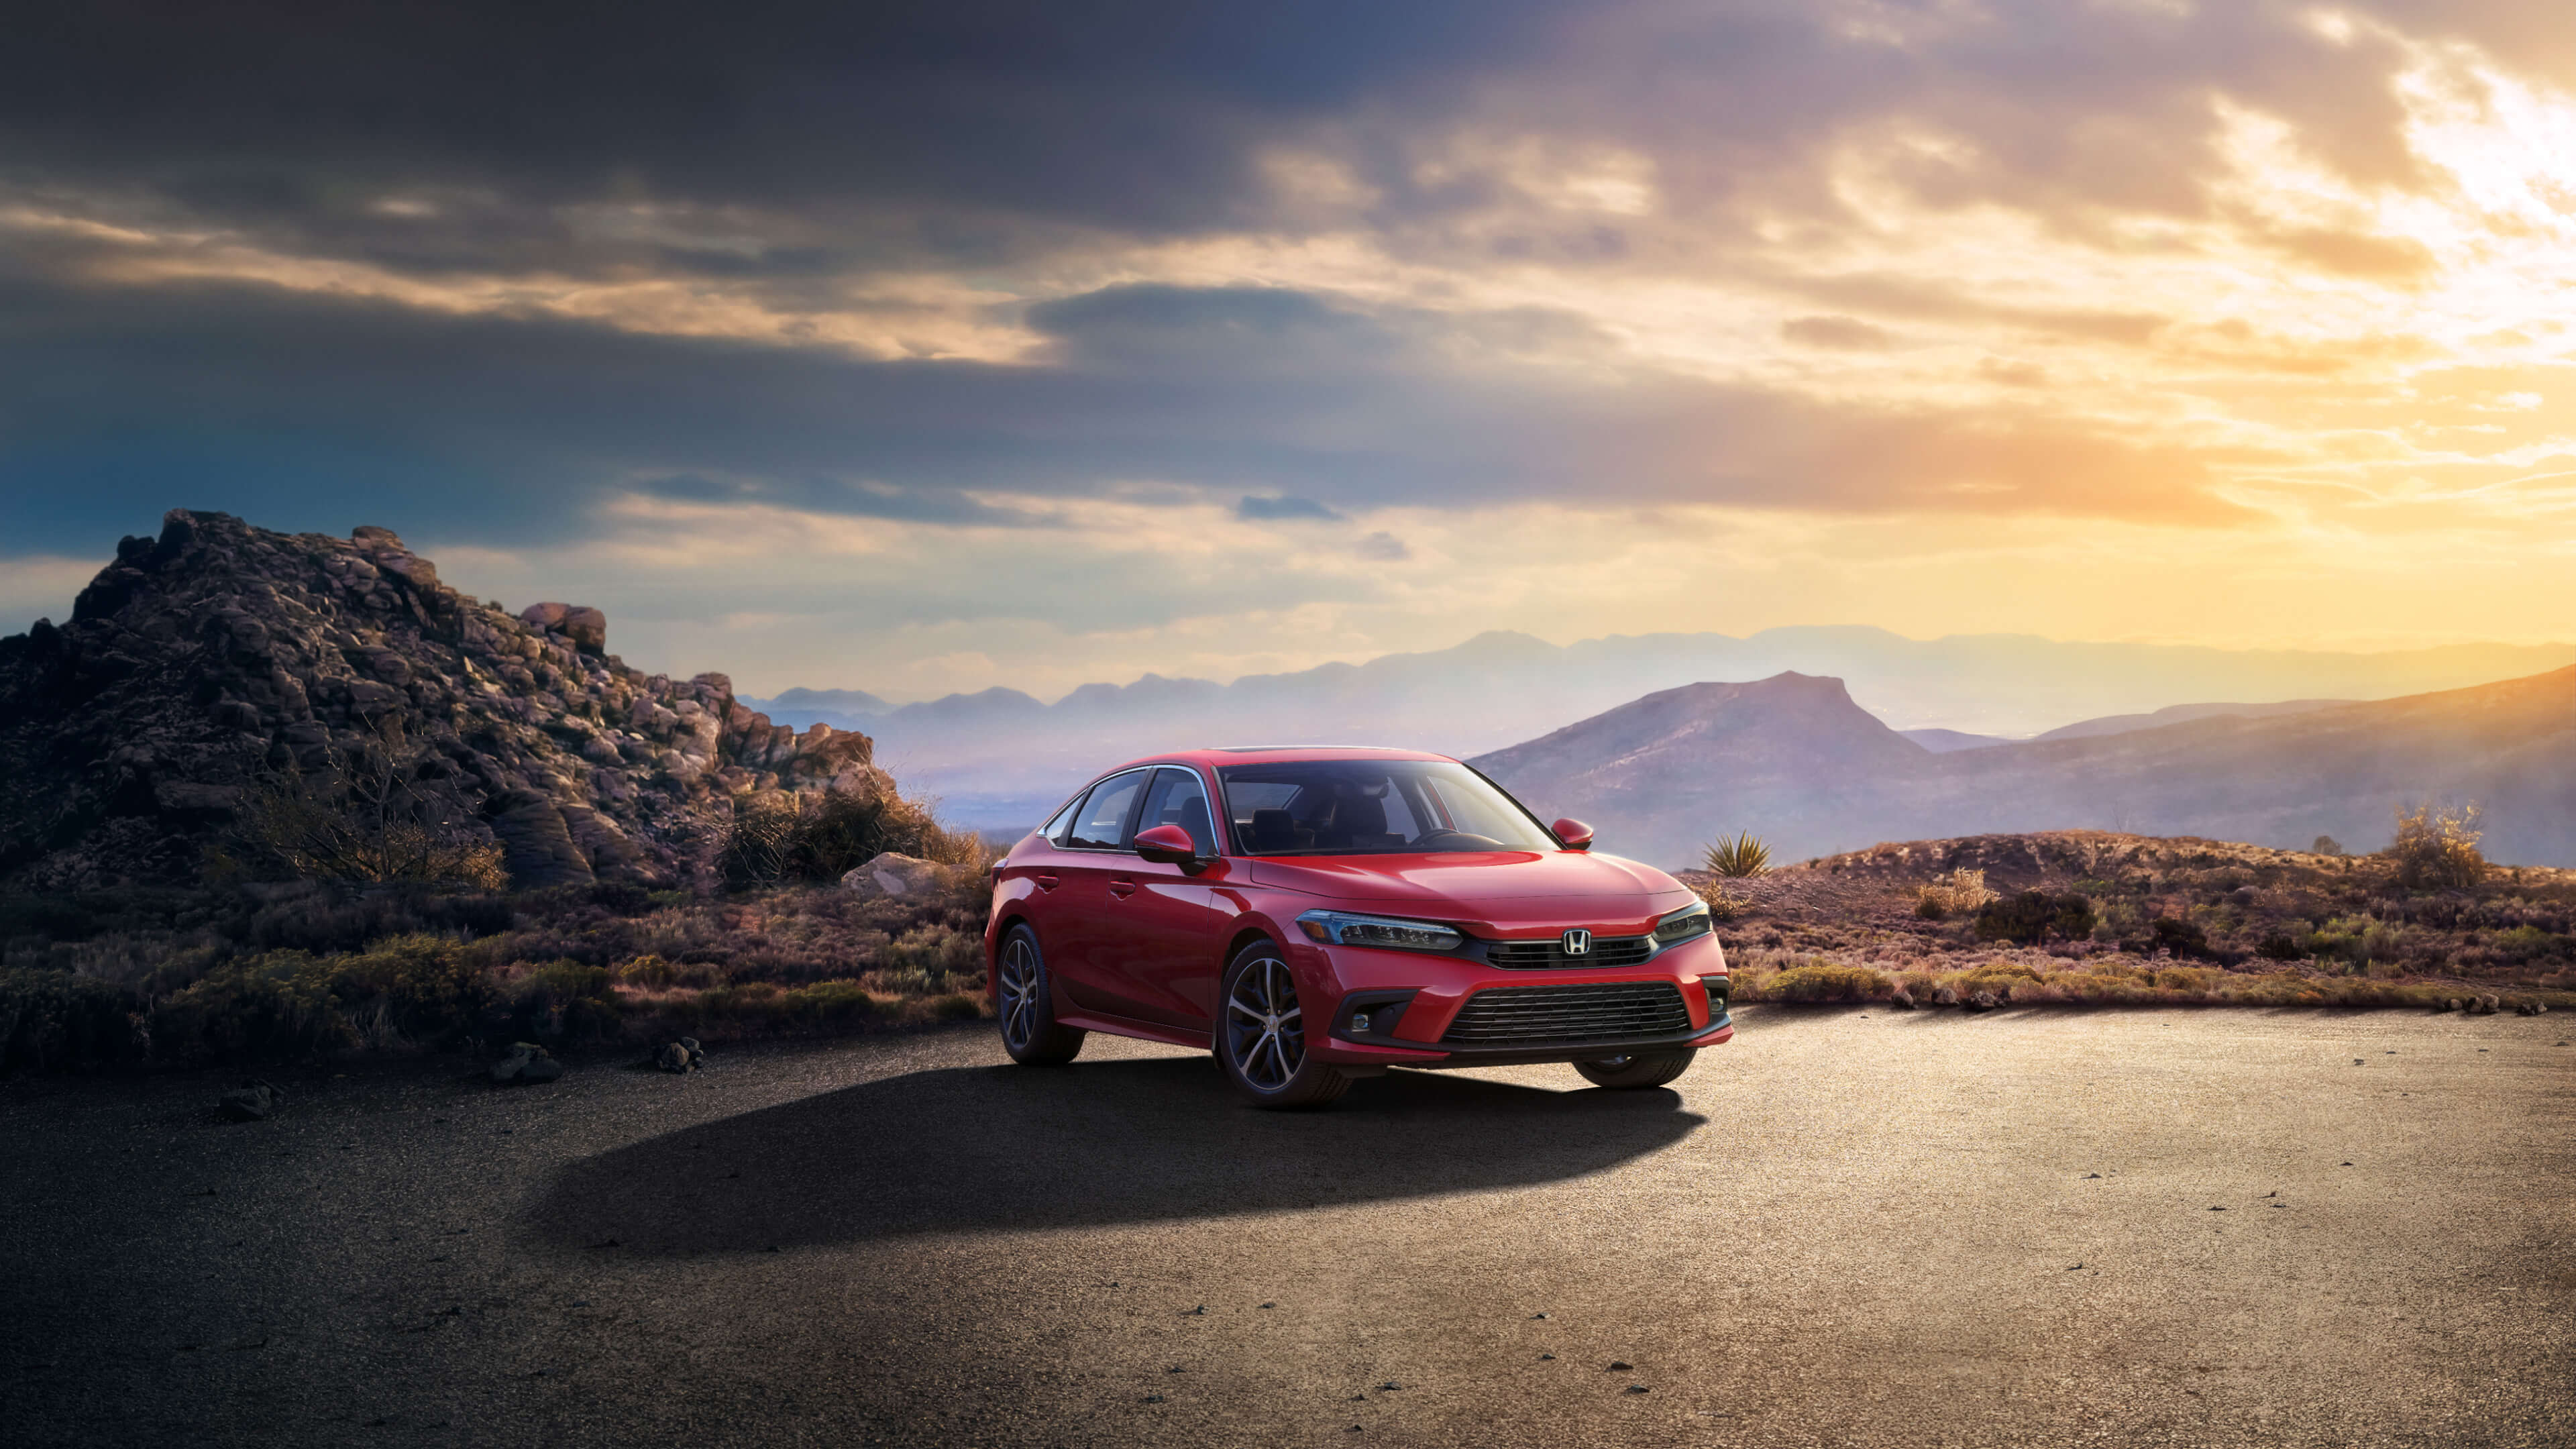 Front passenger-side, angled view of a red 2022 Honda Civic parked on asphalt with desert mountains in the background.